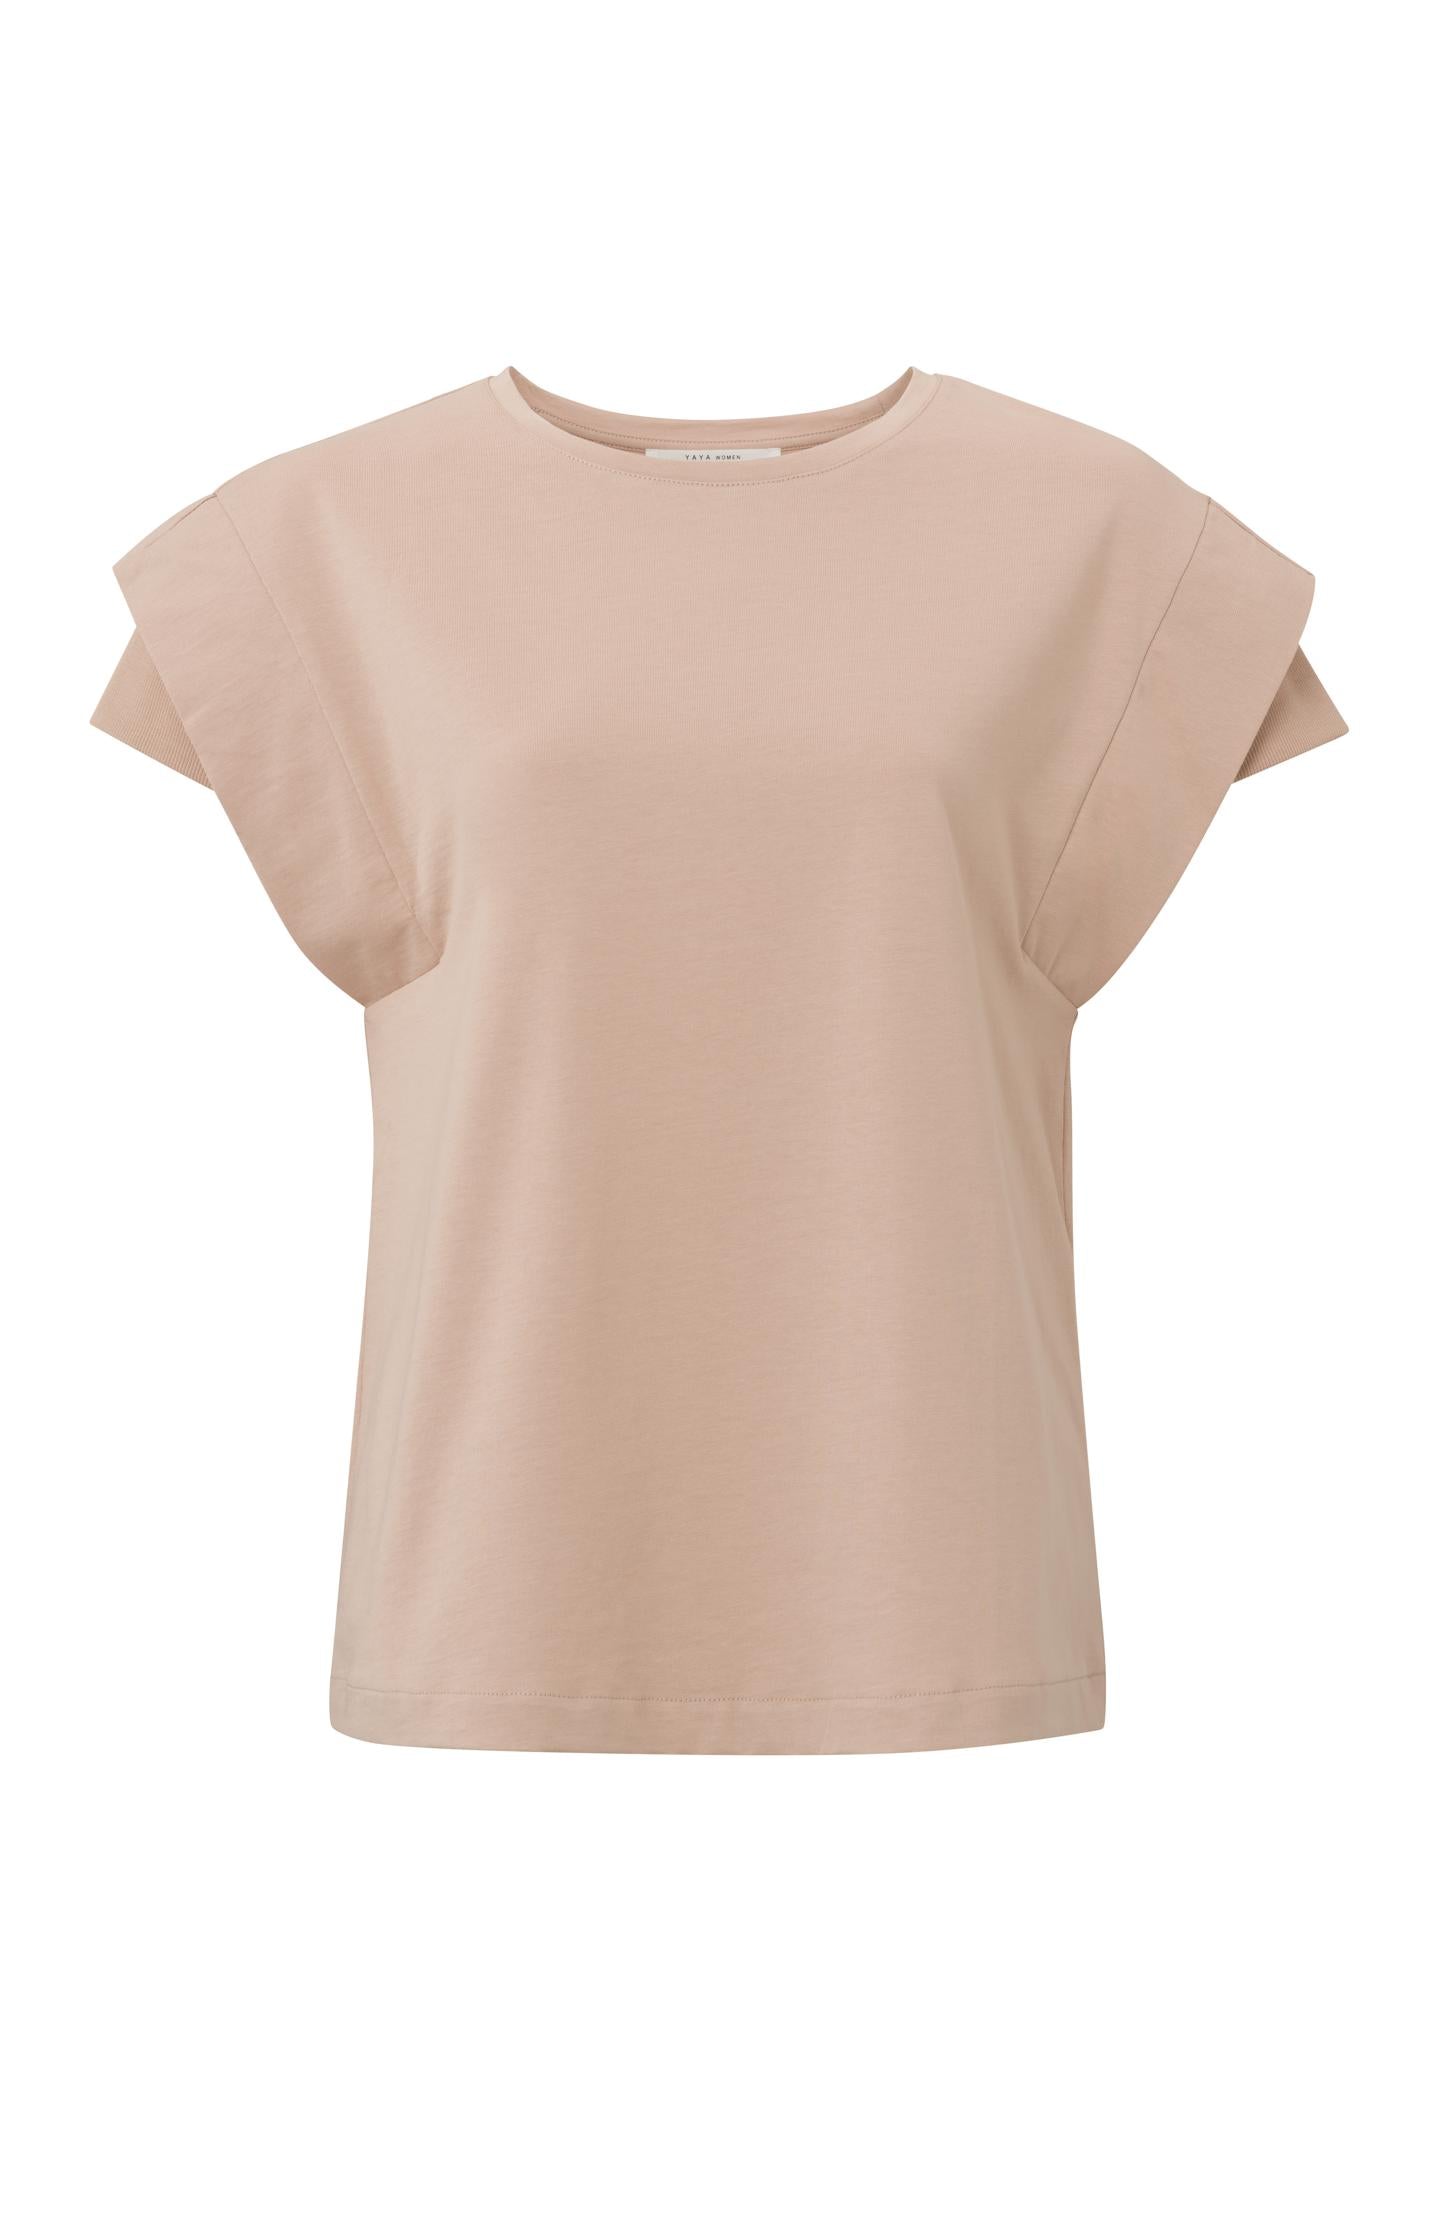 Top with crewneck and double sleeve effect in regular fit - Type: product